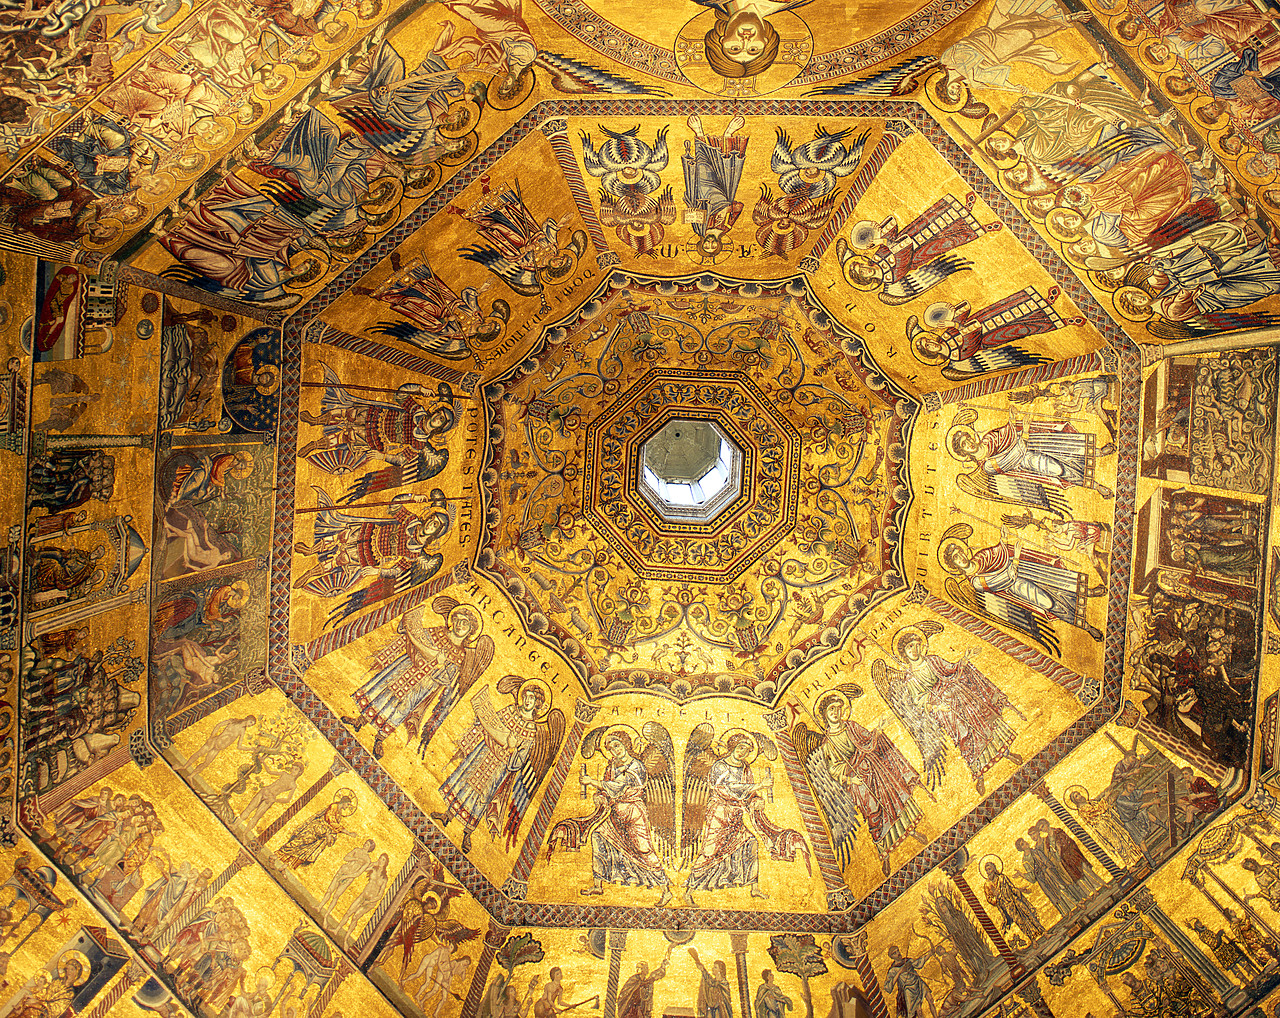 #200344-1 - Ceiling Design of the Bapistry, Florence, Tuscany, Italy